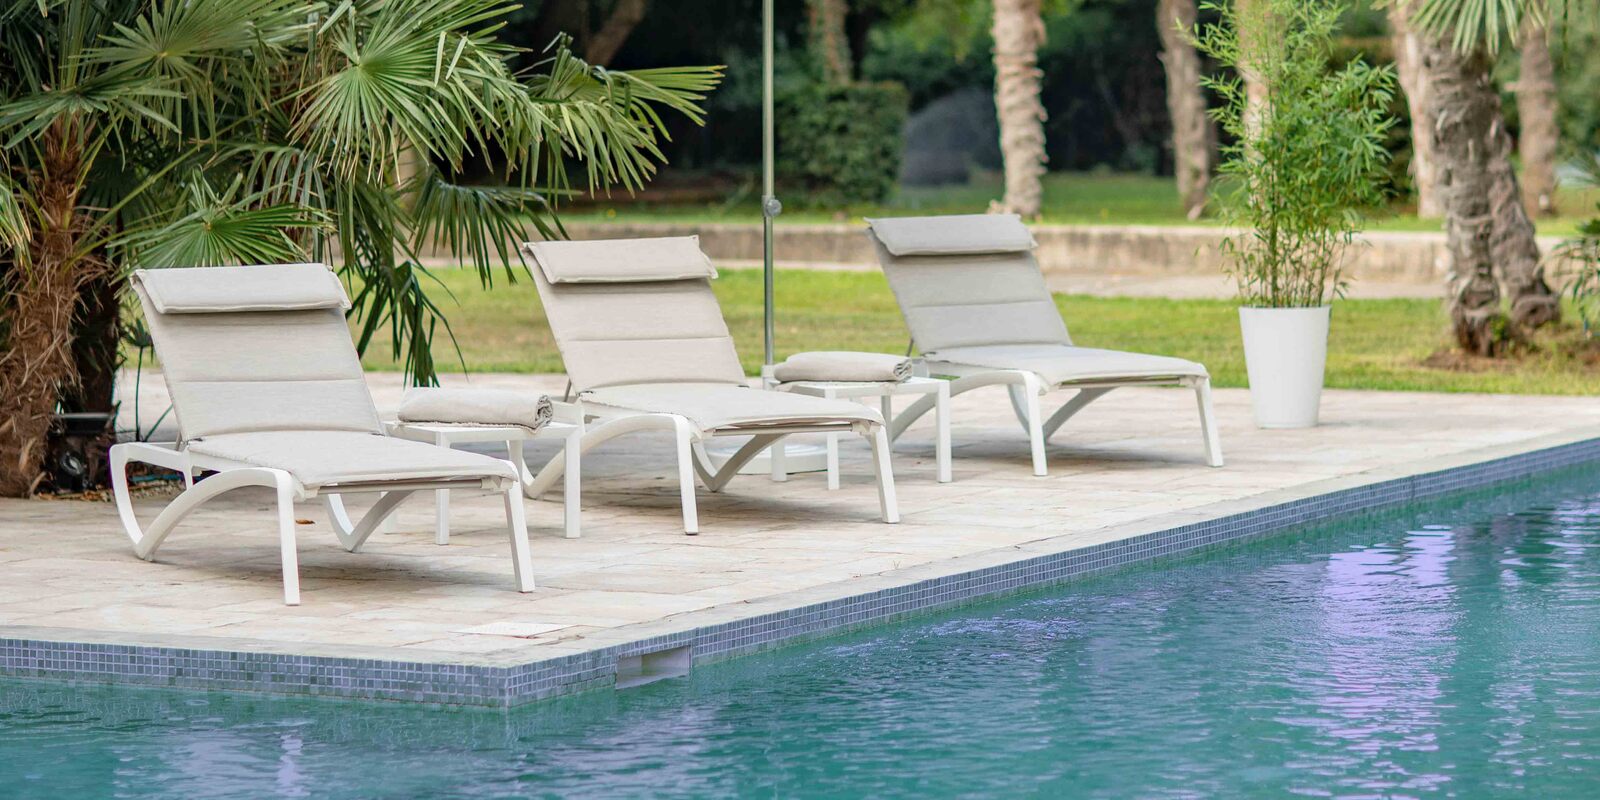 lounge chairs by pool and lawn